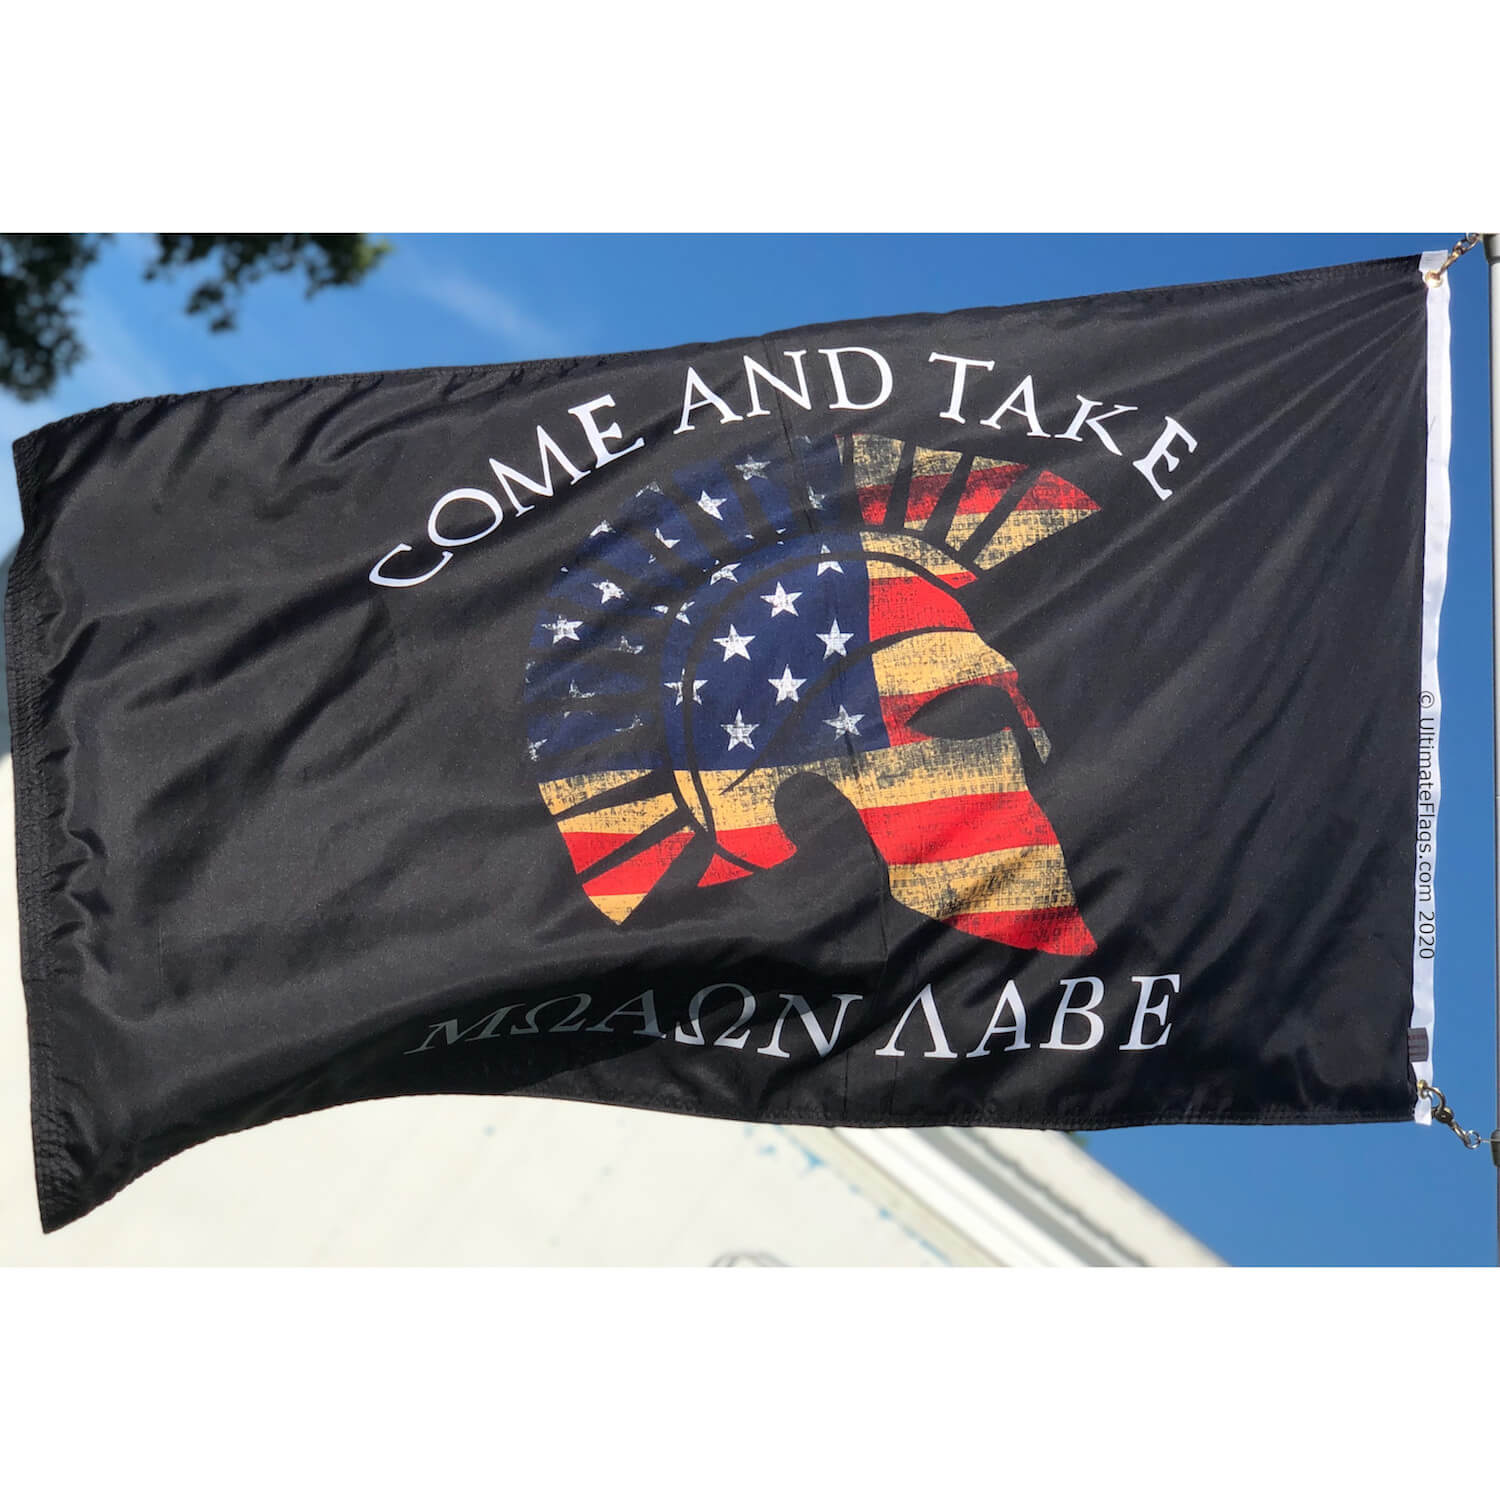 Discover the Ultimate Collection of Flags at Ultimate Flags Inc